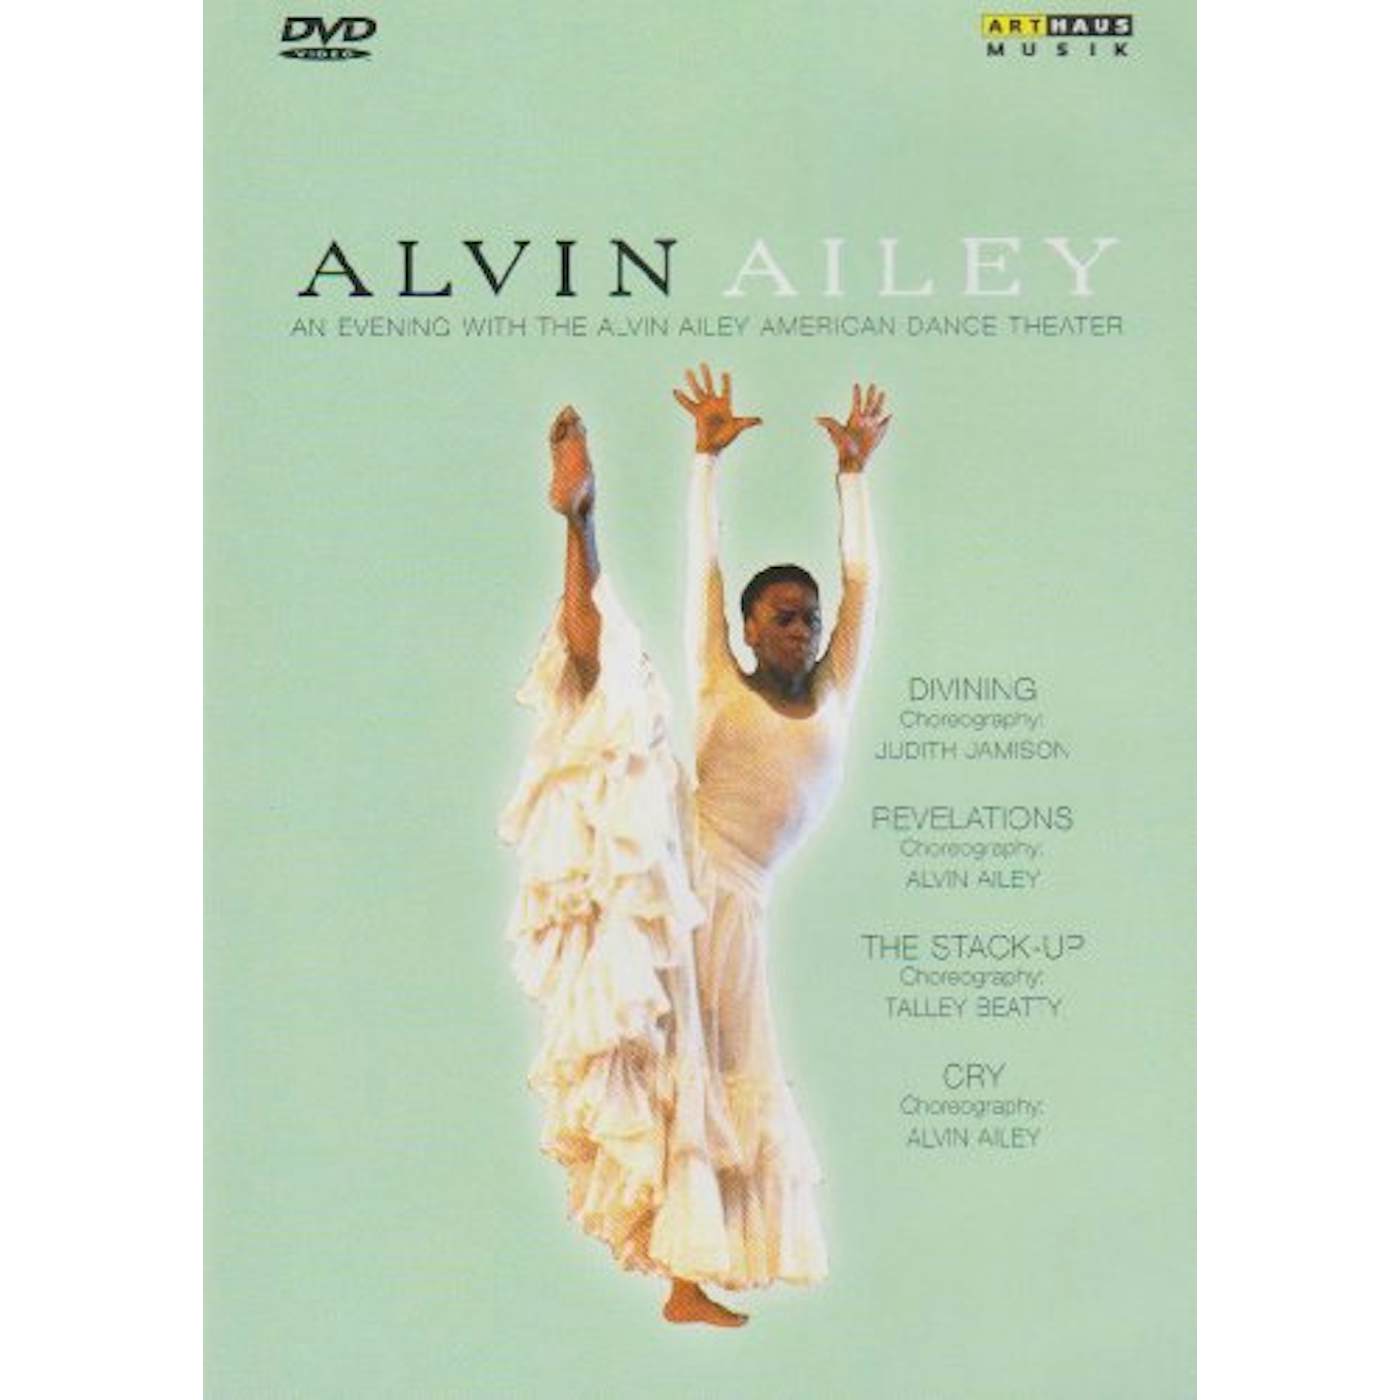 AN EVENING WITH THE ALVIN AILEY DVD